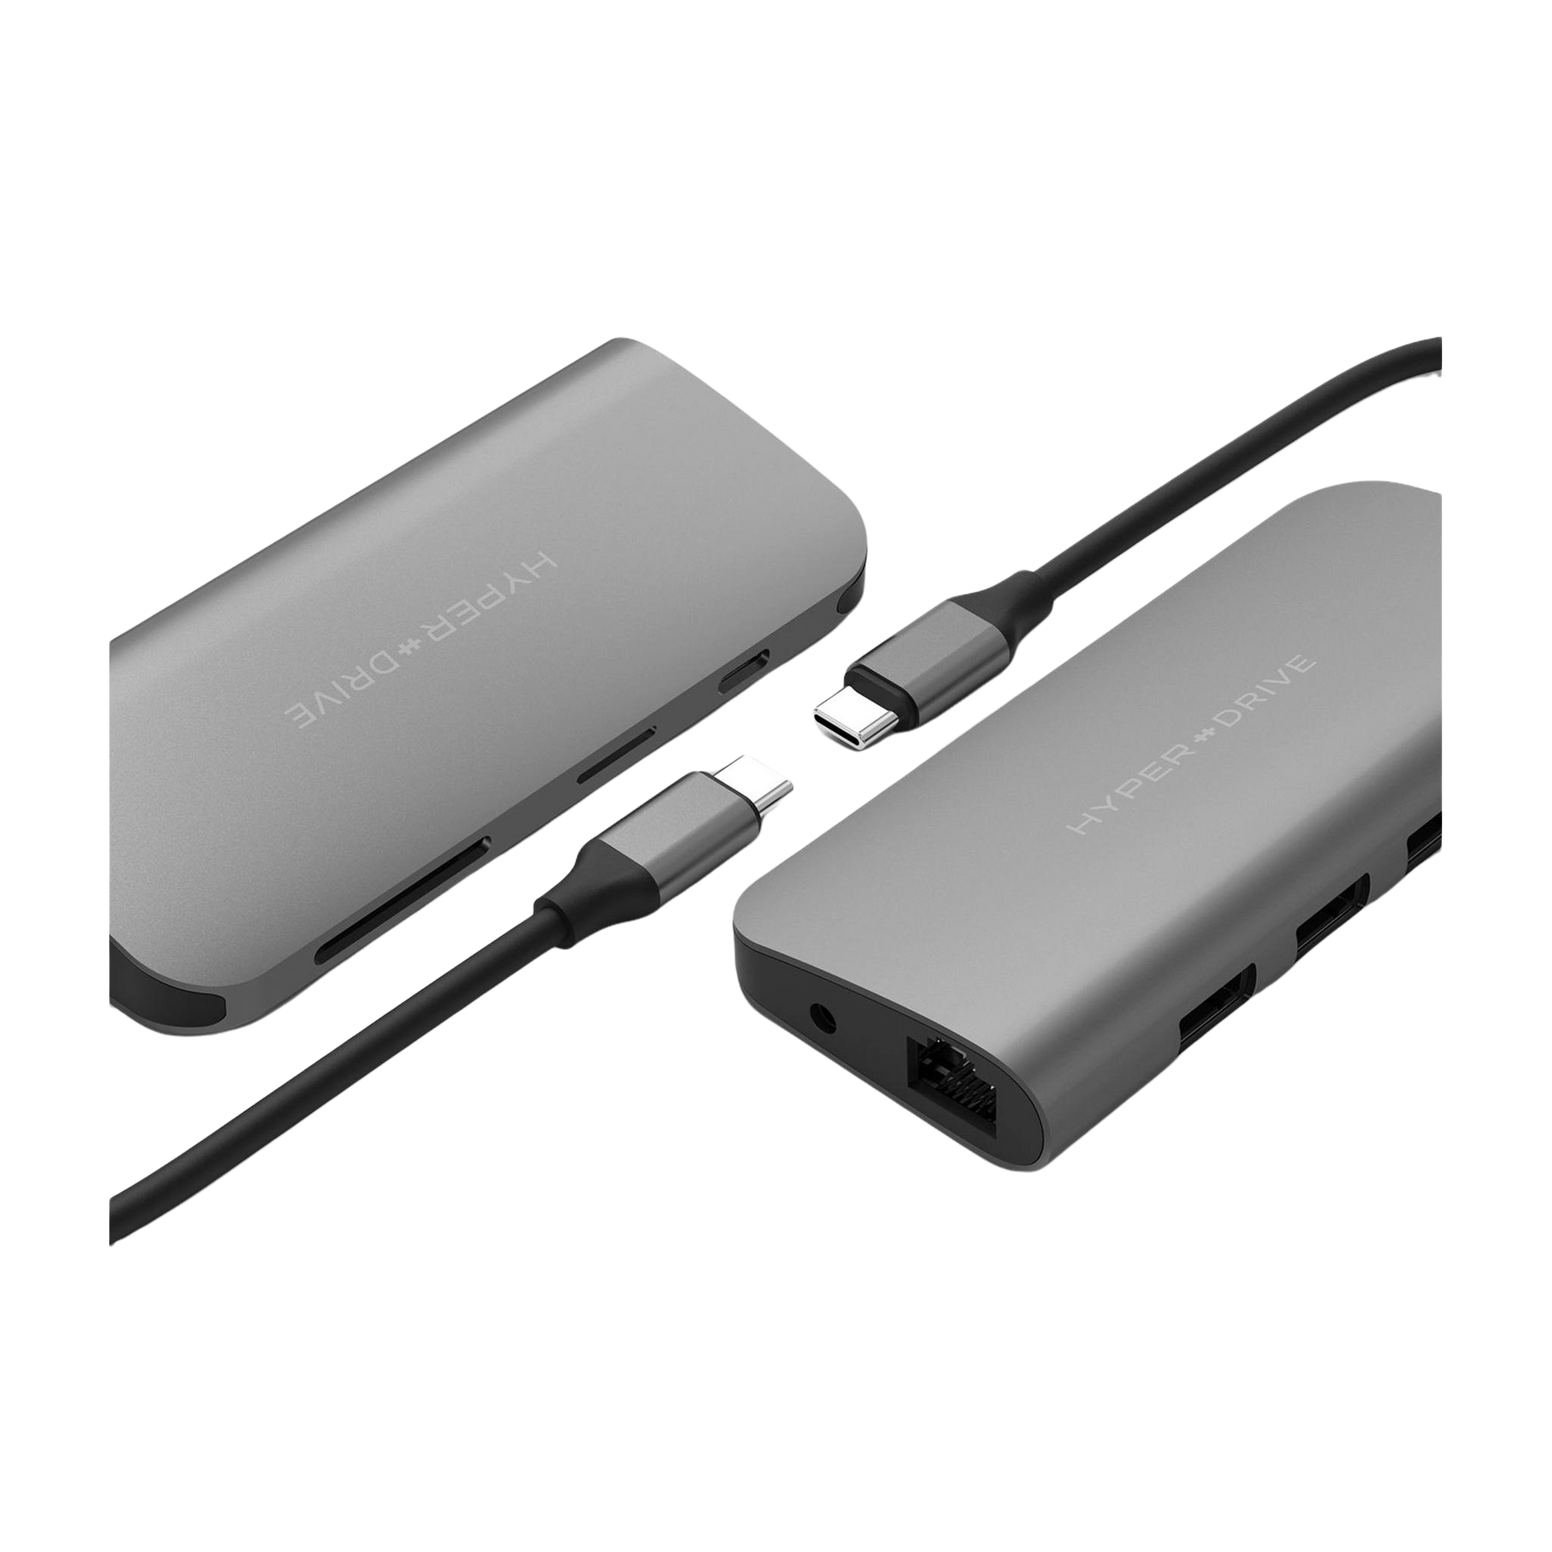 HyperDrive Power 9-in-1 USB Type-C Hub - Space Grey - Discontinued